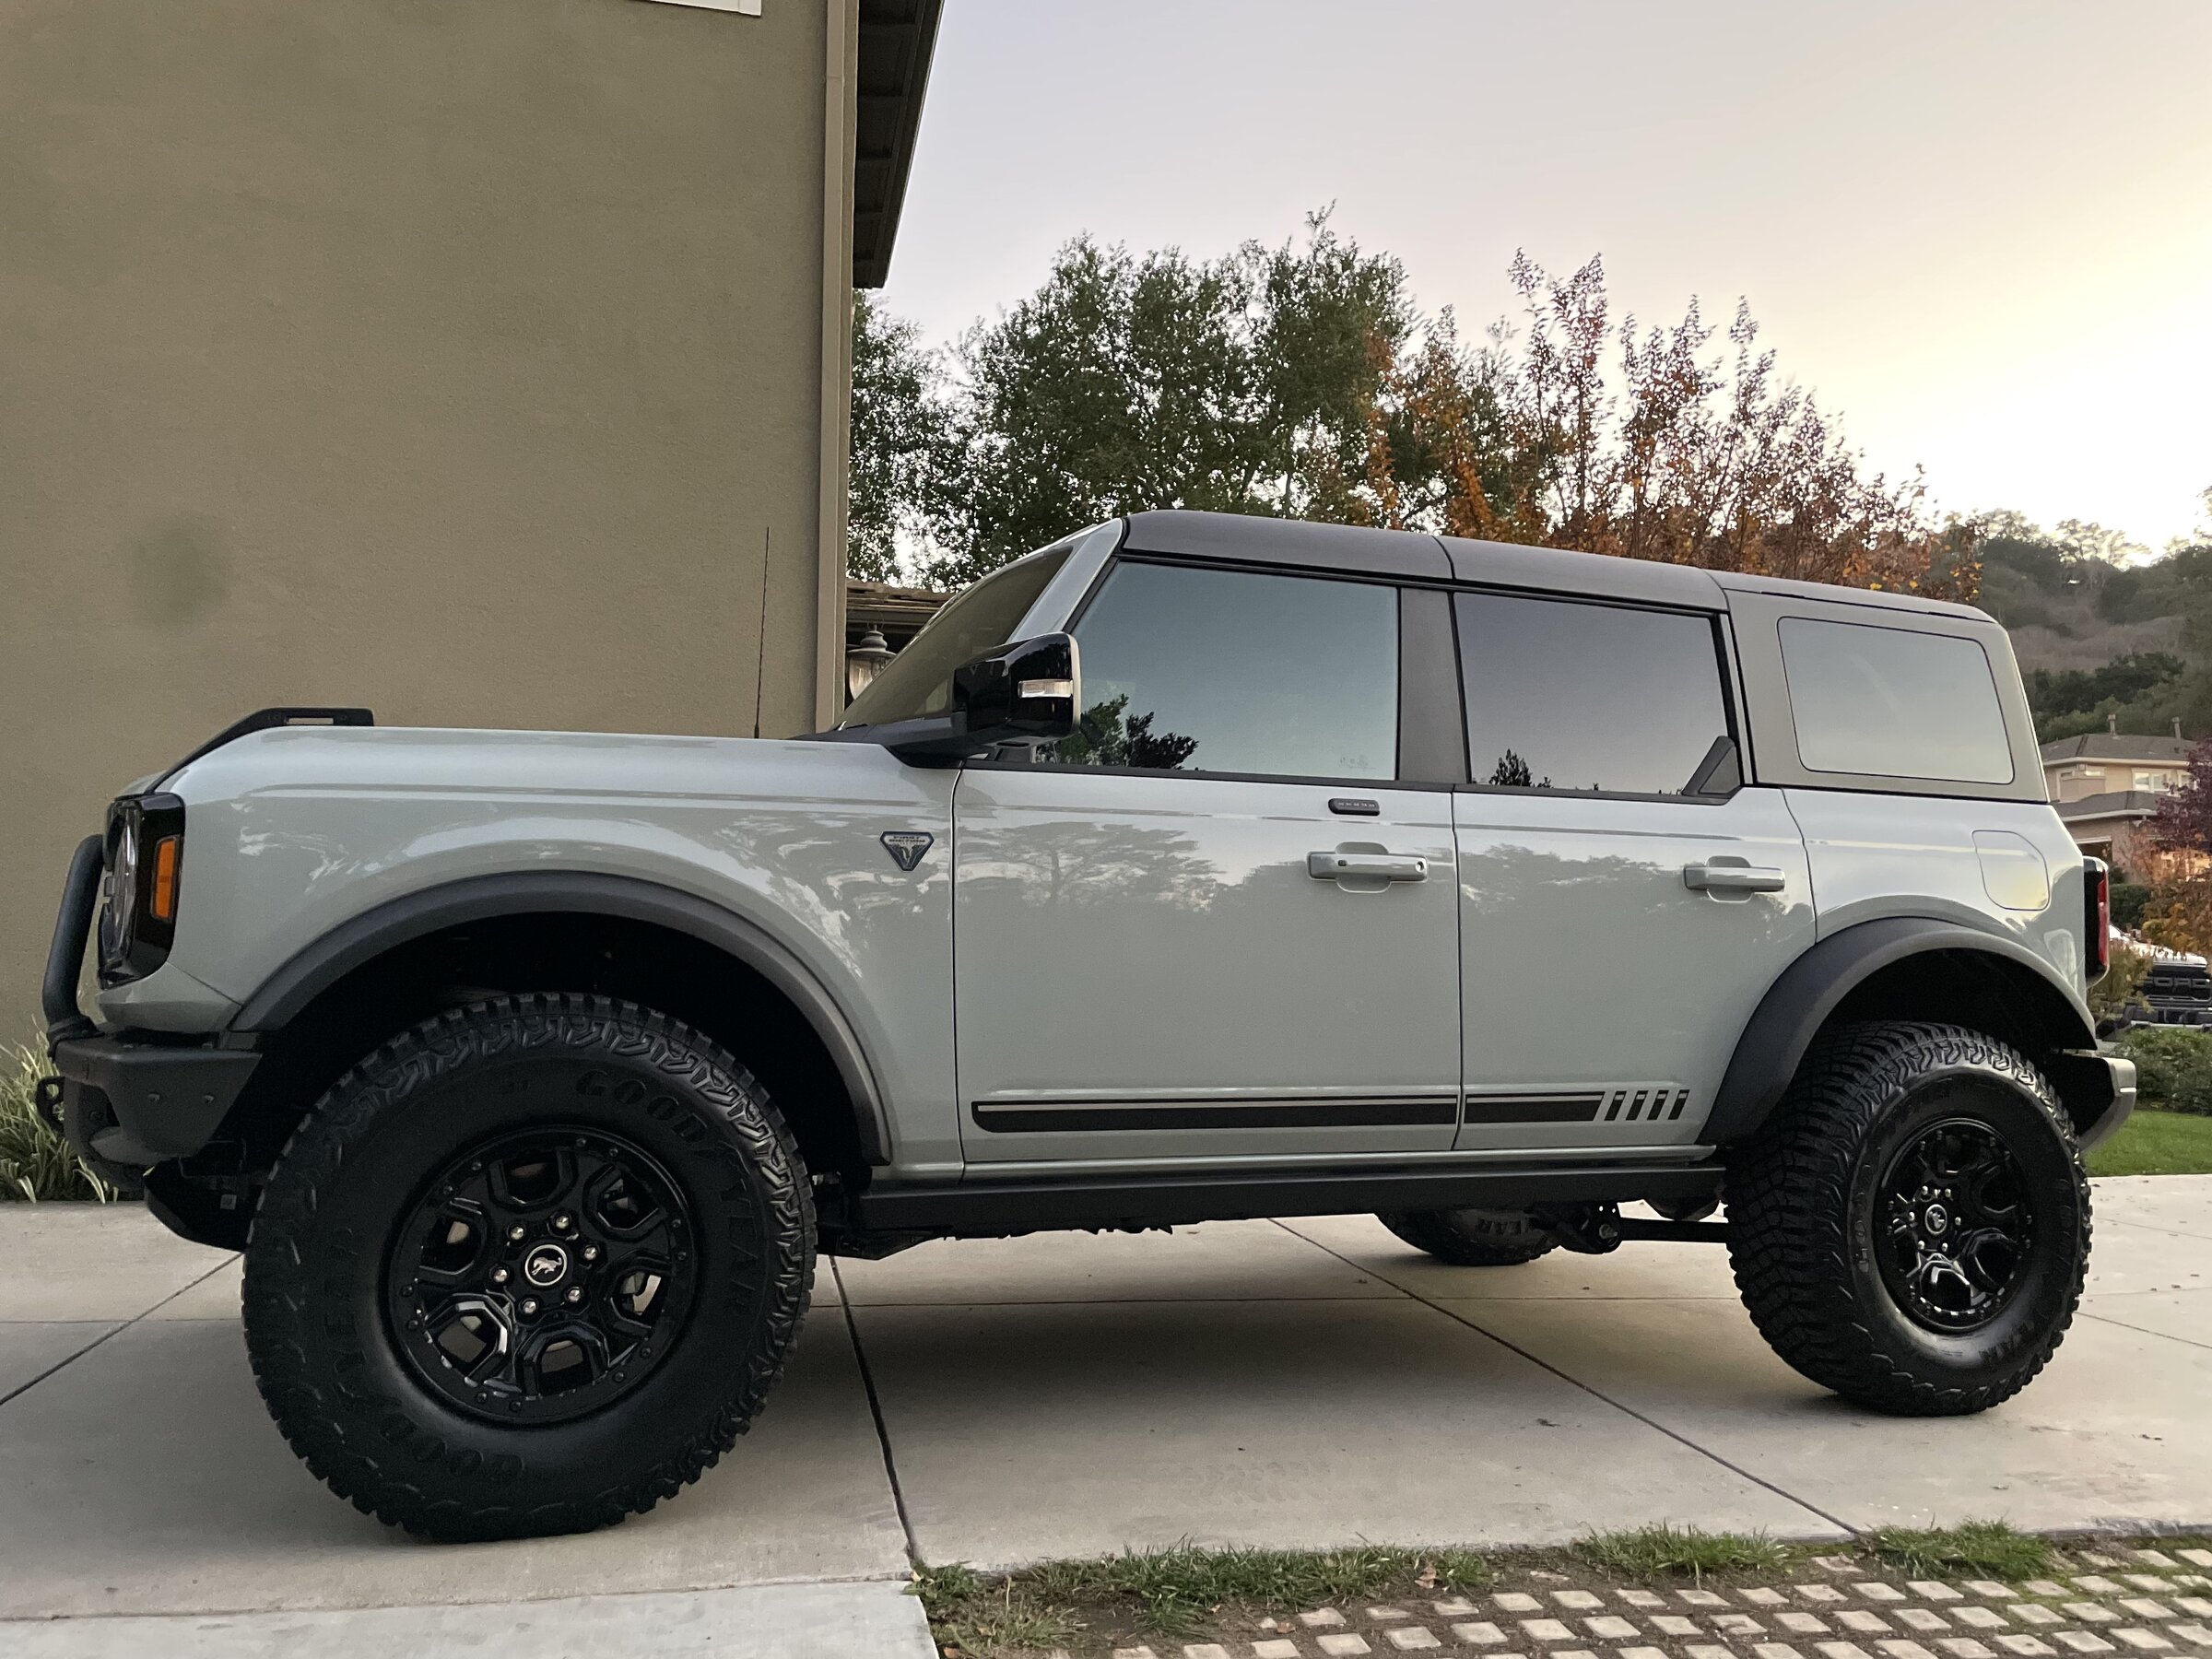 Ford Bronco First Edition 4Dr, Cactus Grey, all options, excellent condition, 2k miles 66009990189__A8E64AE2-5186-4E72-804D-CD55611ED1A6.fullsizerender